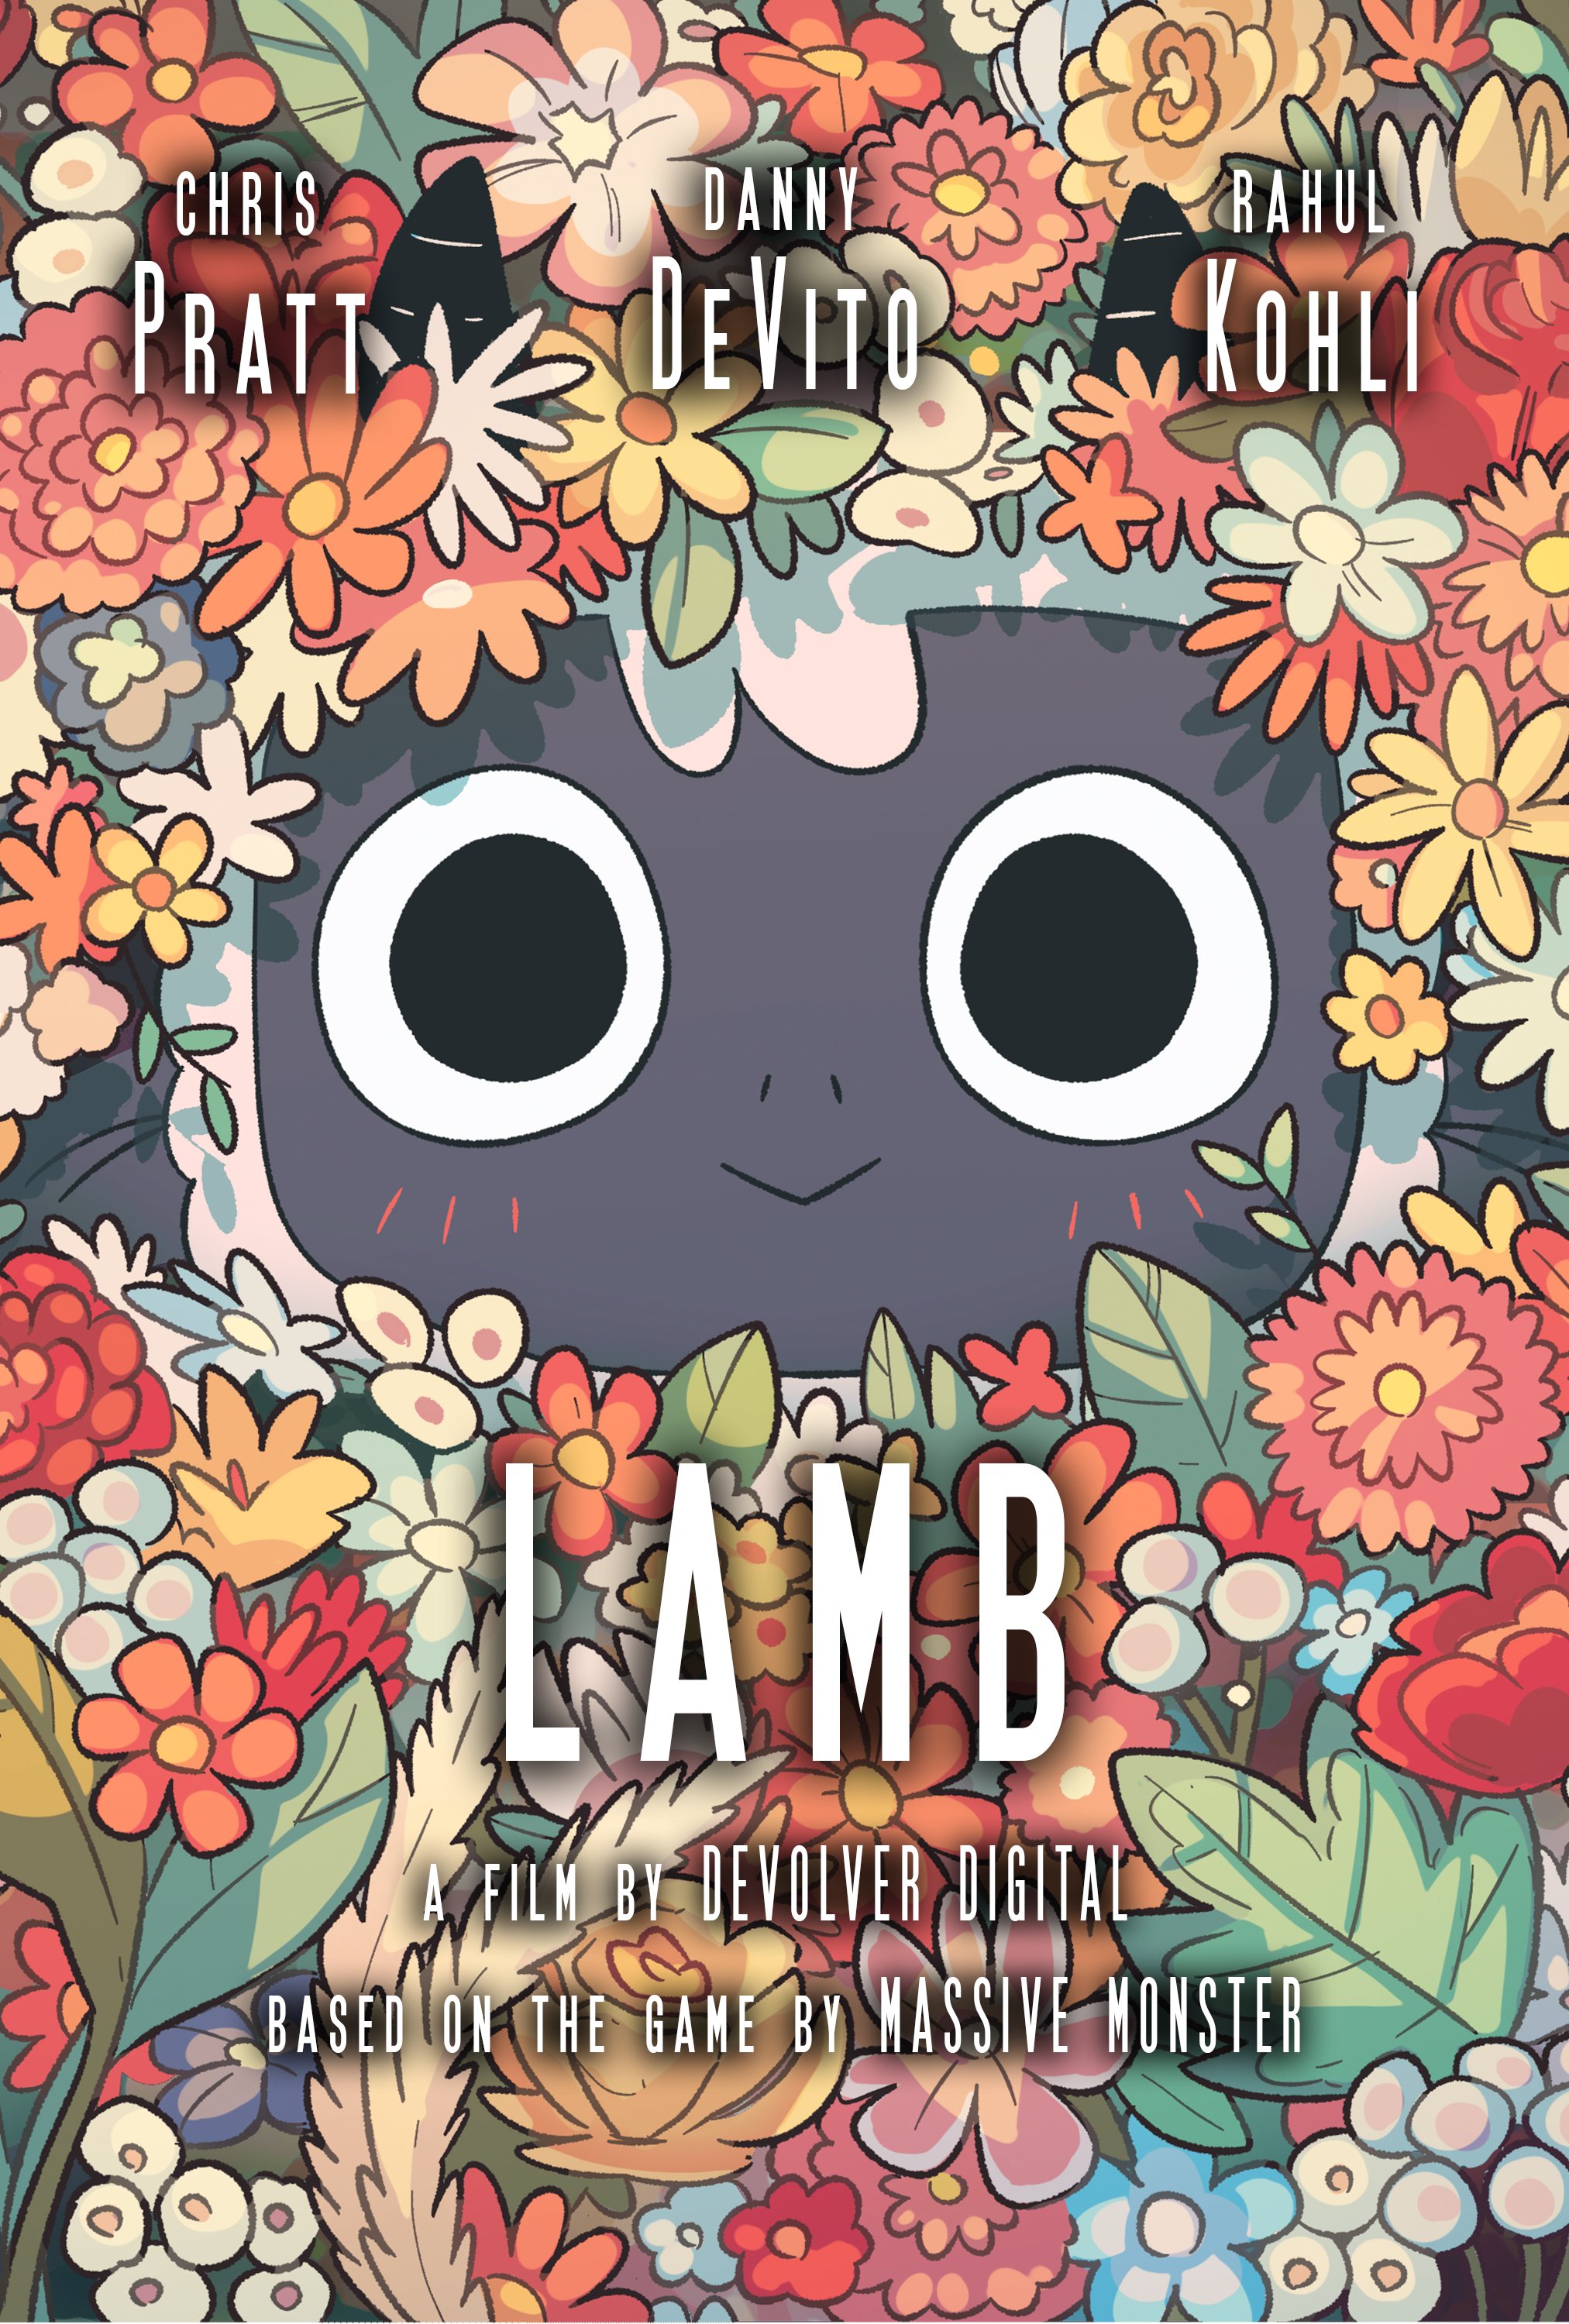 The Official Cult of the lamb Twitter teased a new Character! : r